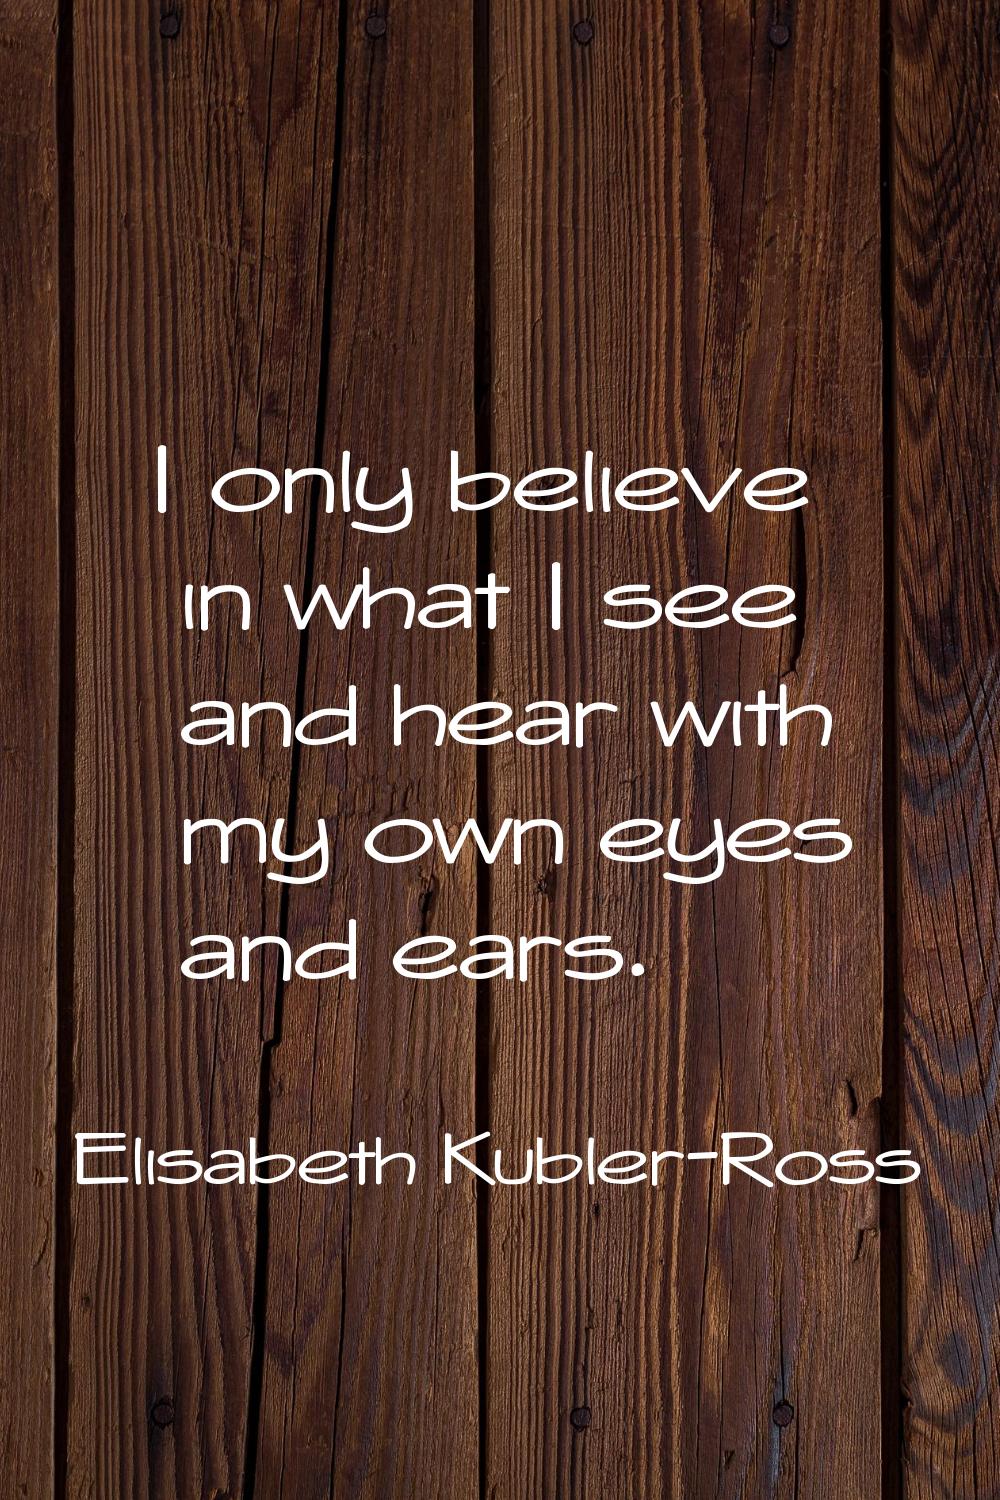 I only believe in what I see and hear with my own eyes and ears.